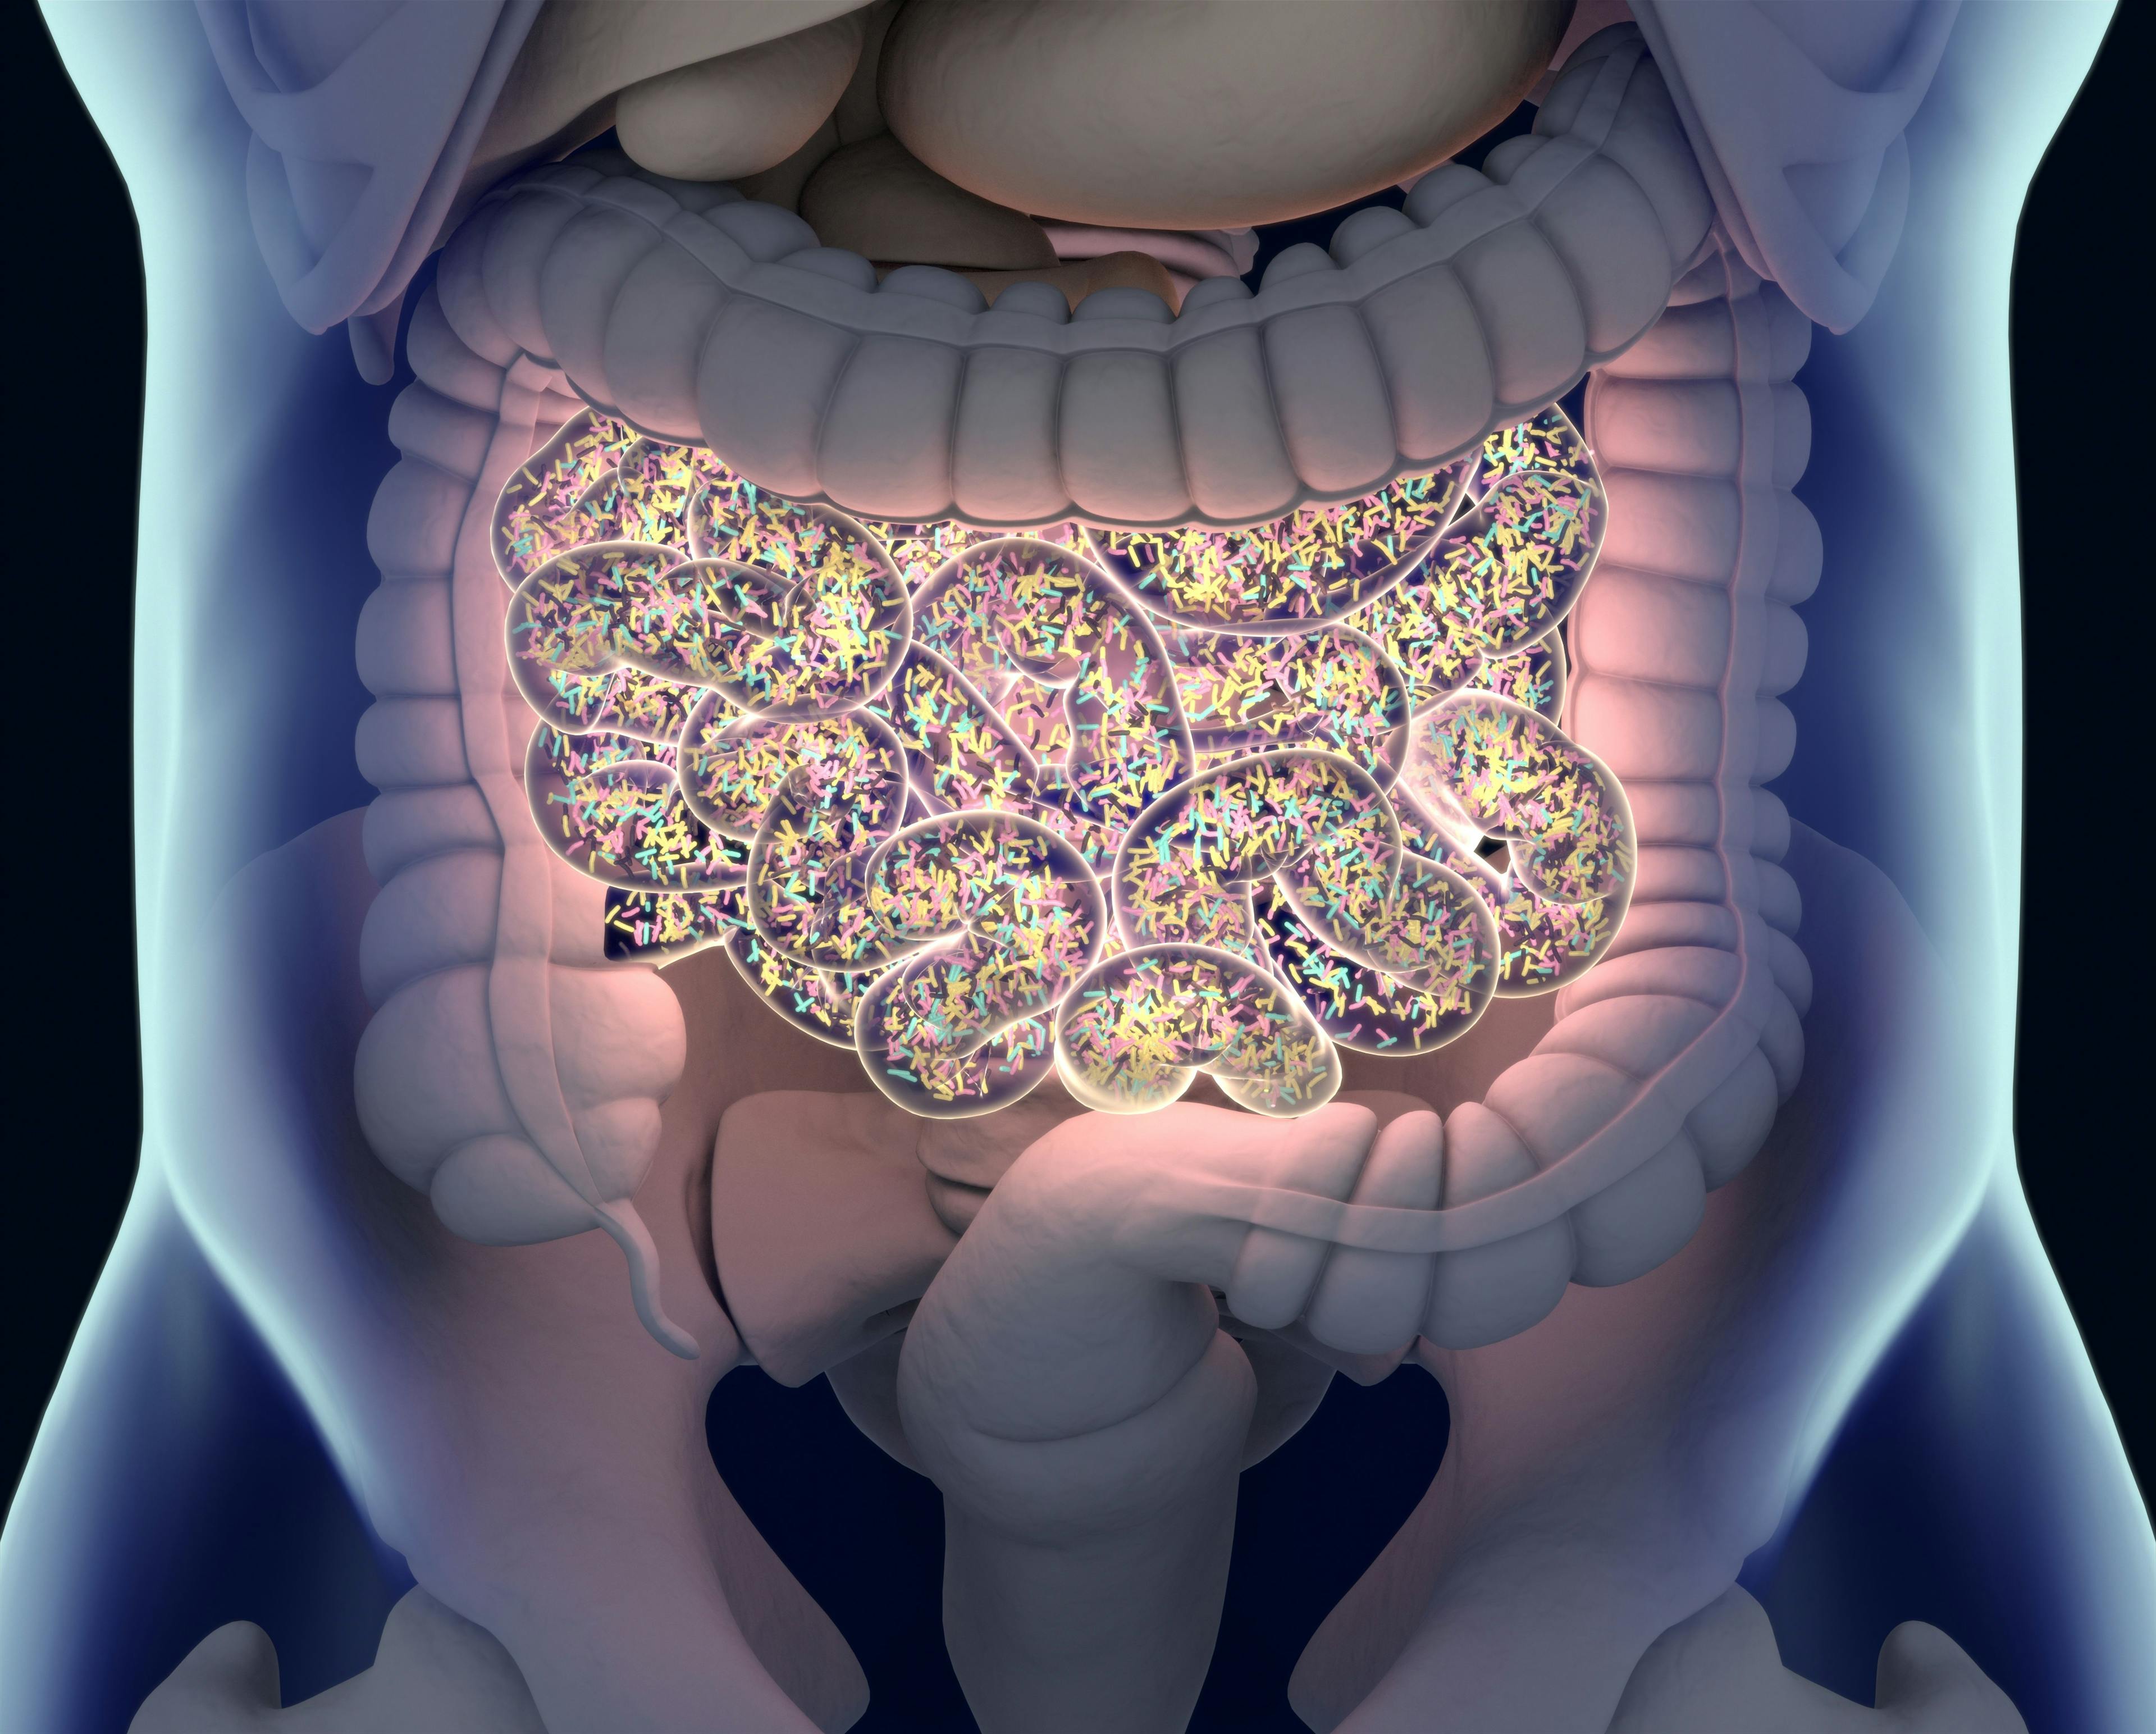 a graphic of the human colon and digestive system